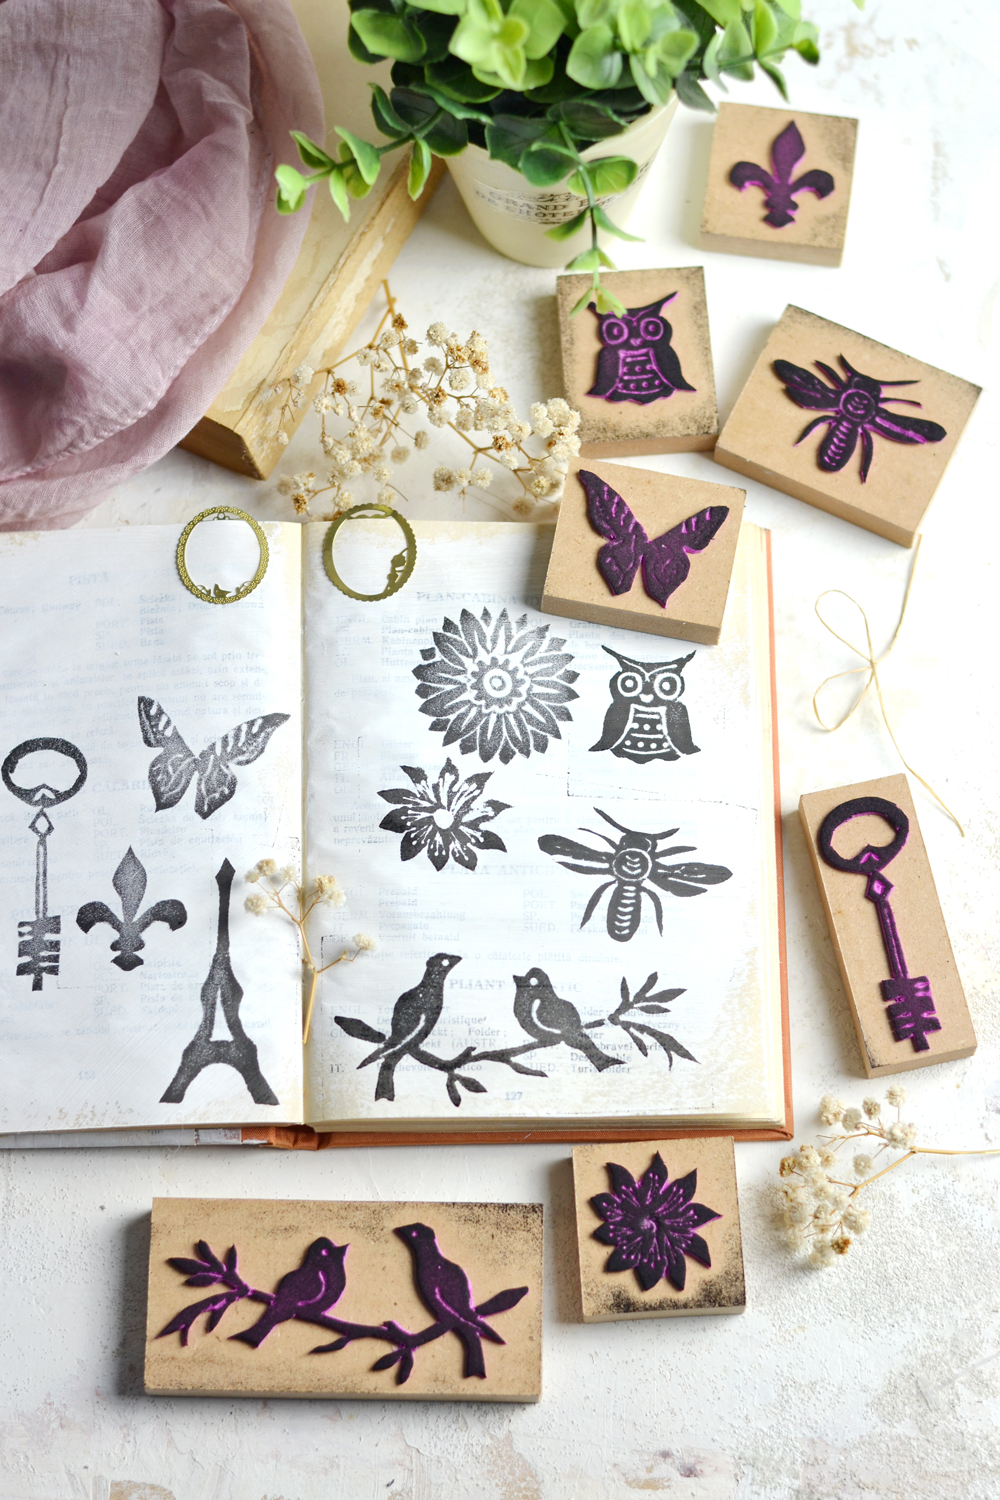 DIY Vintage Foam Stamps - learn how to easily make your own stamps using your favorite images, that can be used on so many of your creative projects!